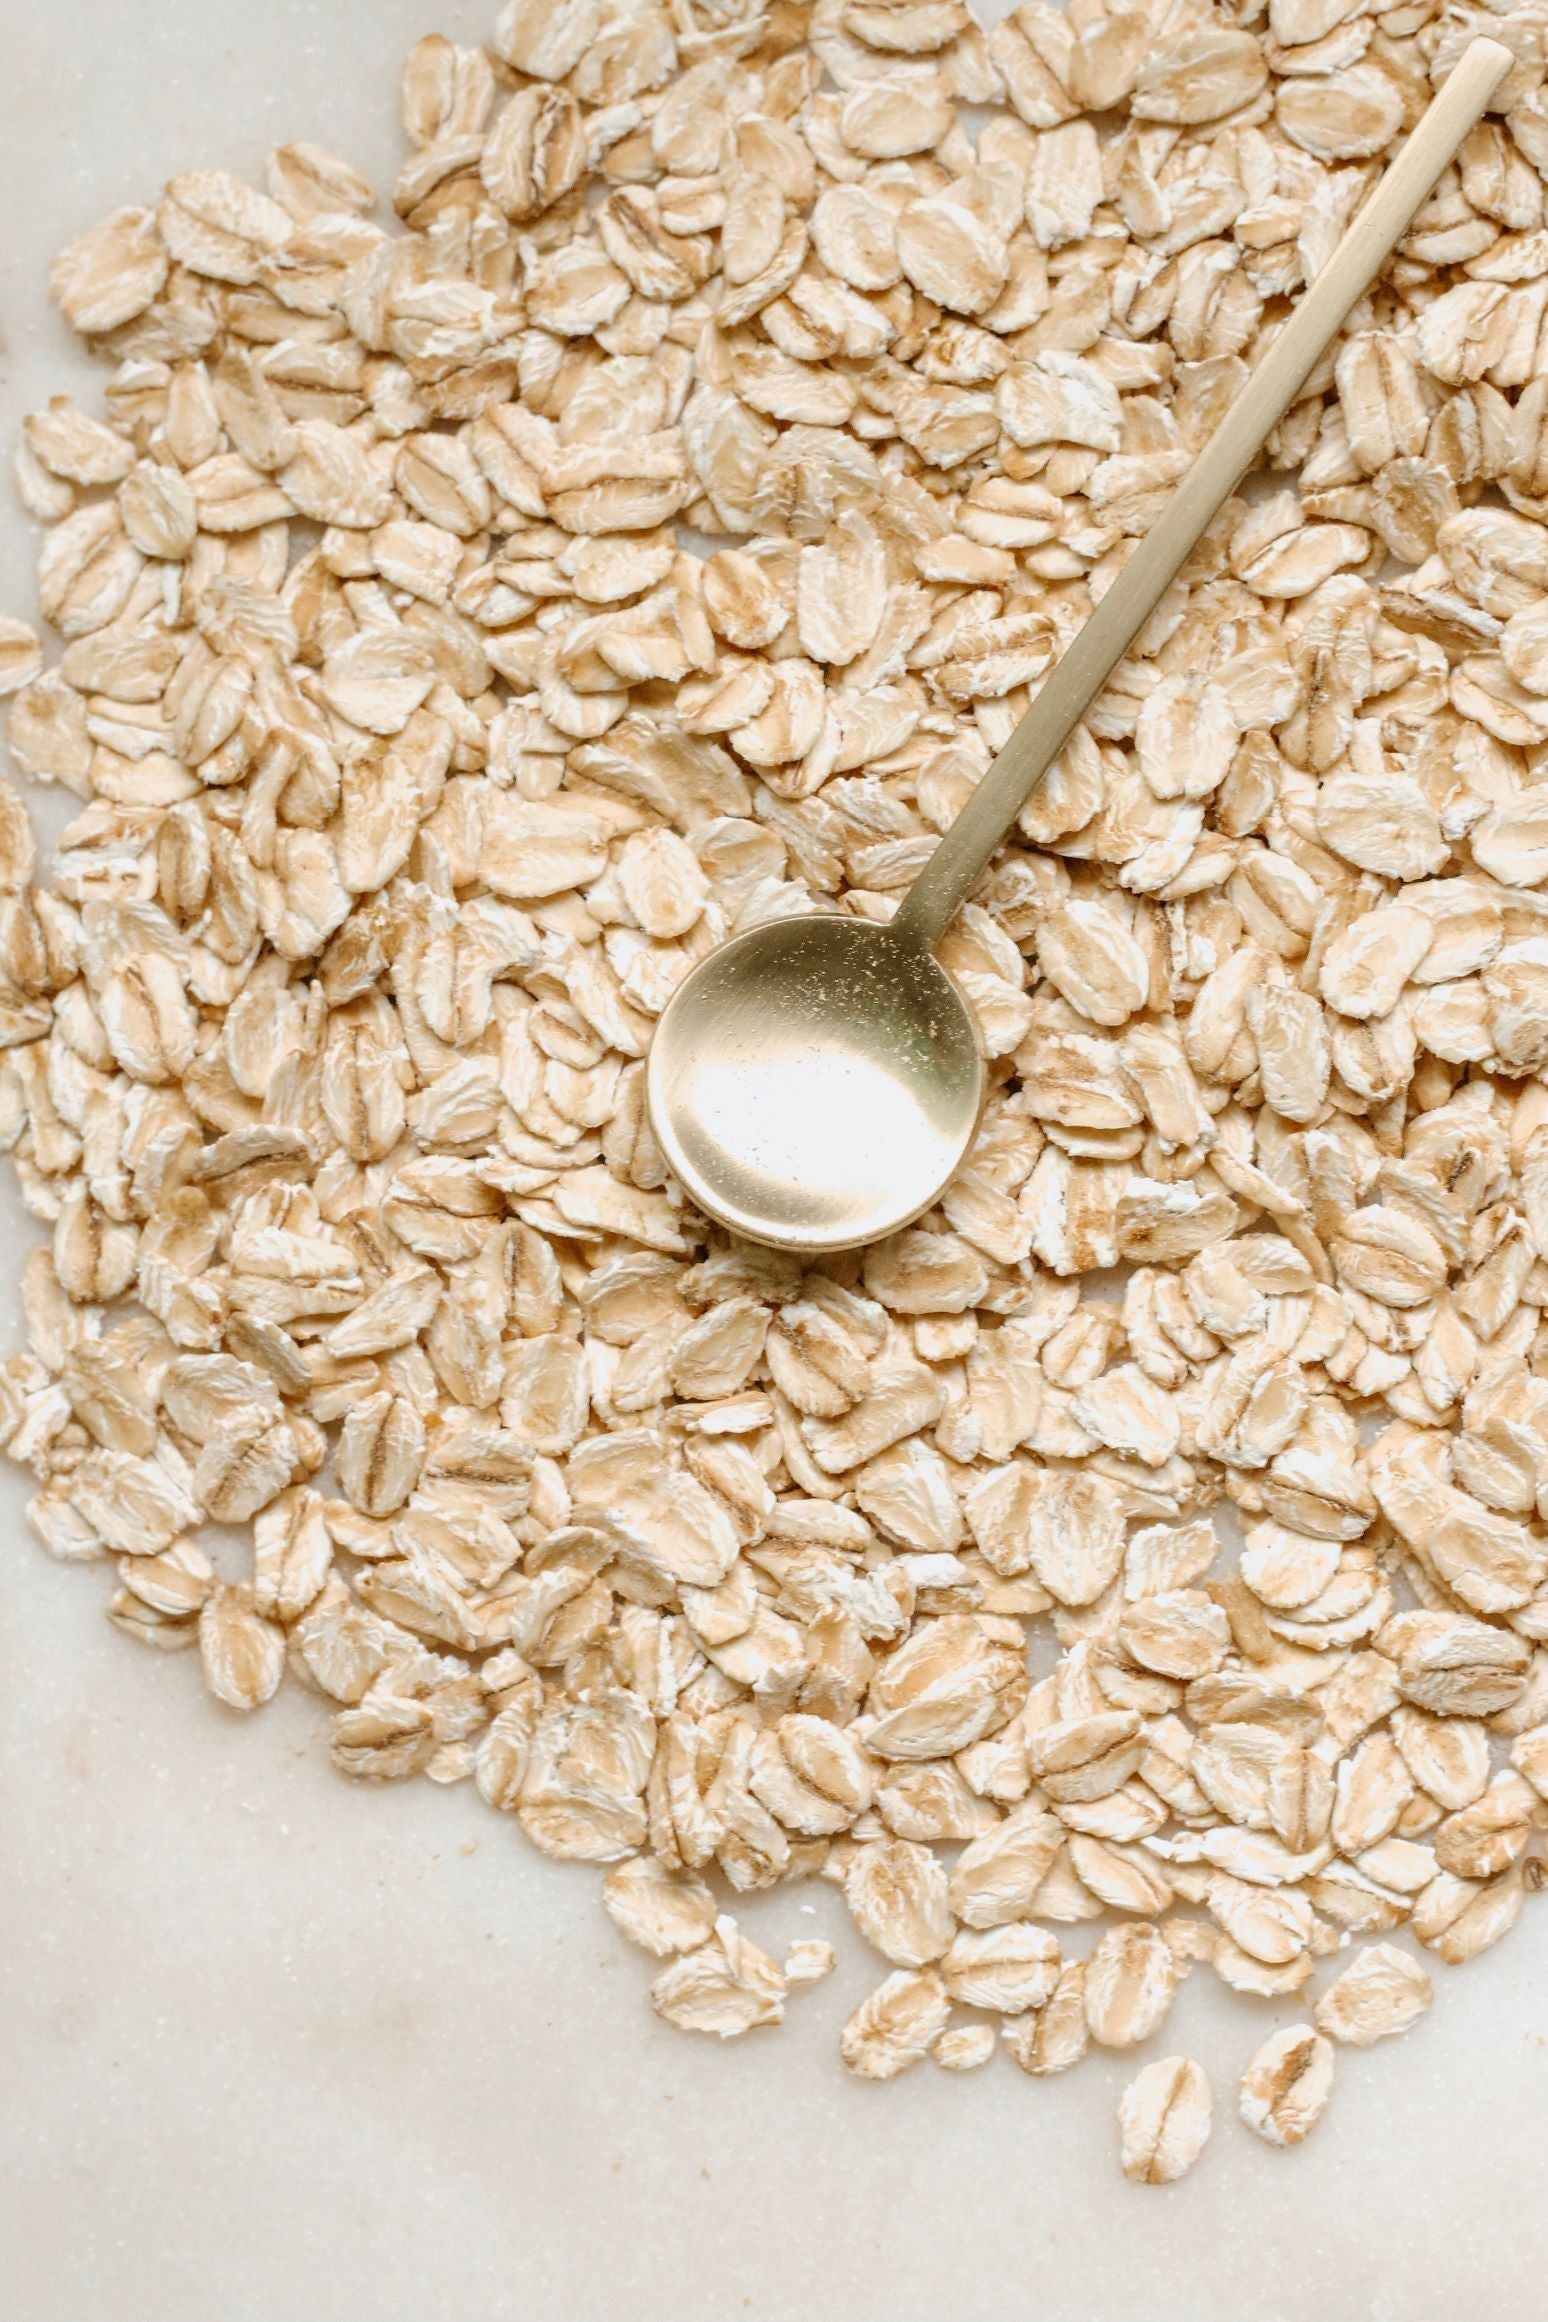 How Can Oats Be Labeled “Gluten-Free” If They Are Not?